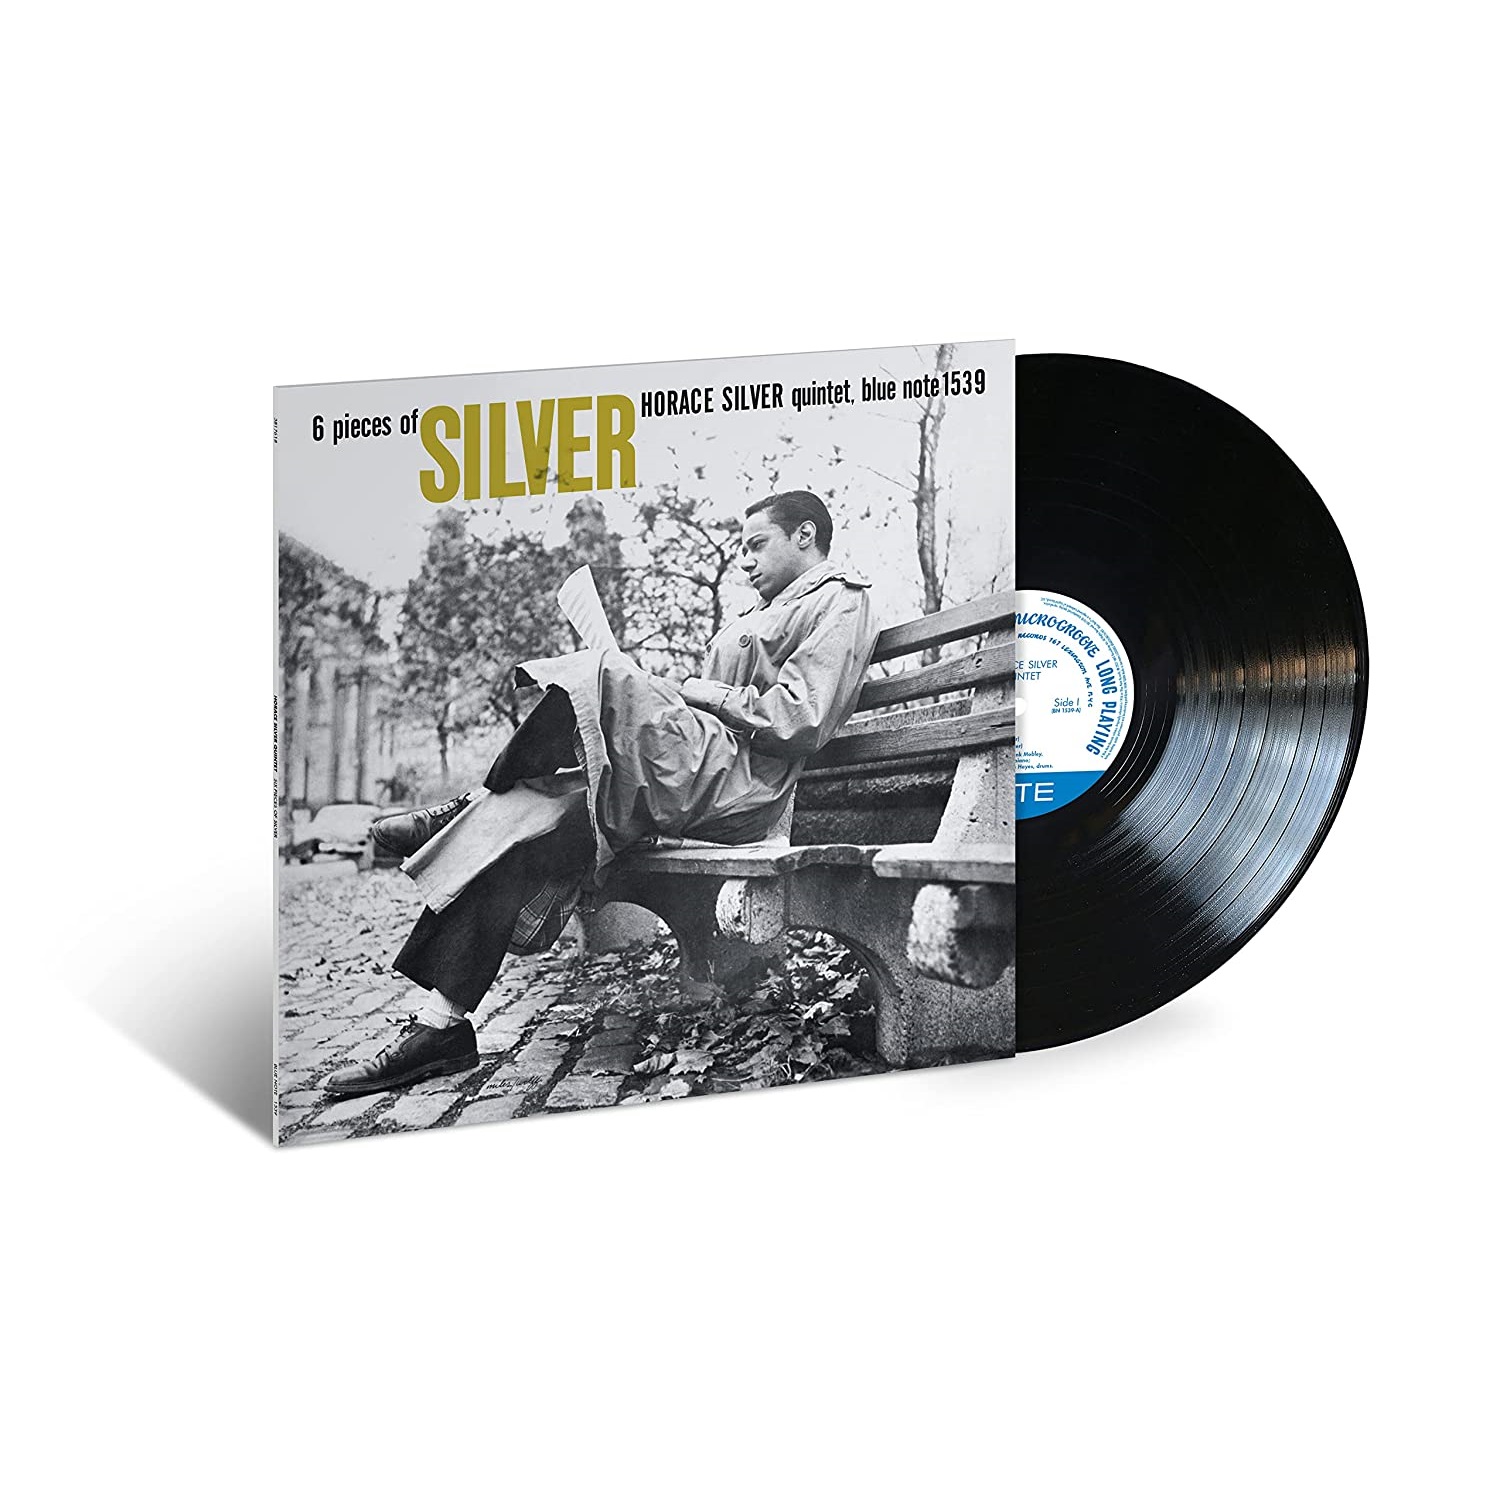 Horace Silver (호레이스 실버) - 6 Pieces Of Silver [LP] 